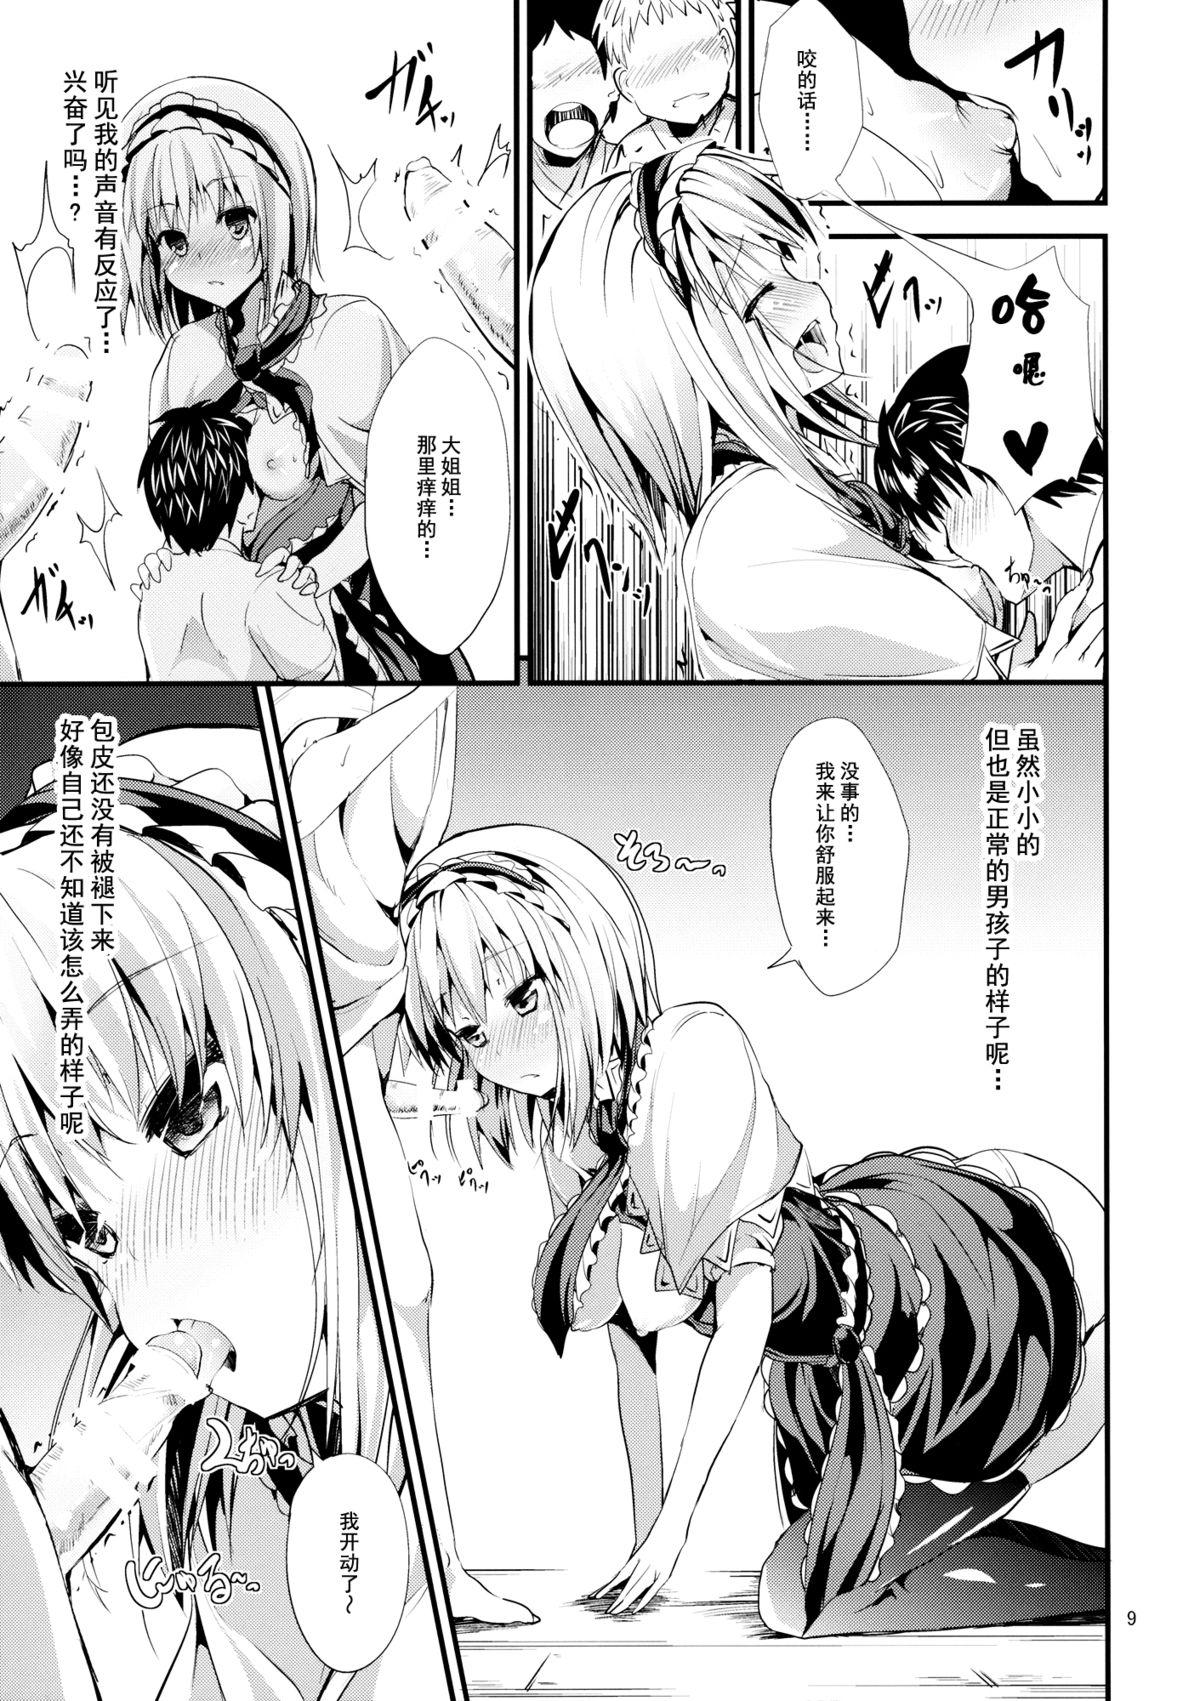 Big breasts (Reitaisai 11) [Water Drop (MA-SA)] The Holiday (Touhou Project)[chinese]【伞尖汉化】 - Touhou project Horny Sluts - Page 9